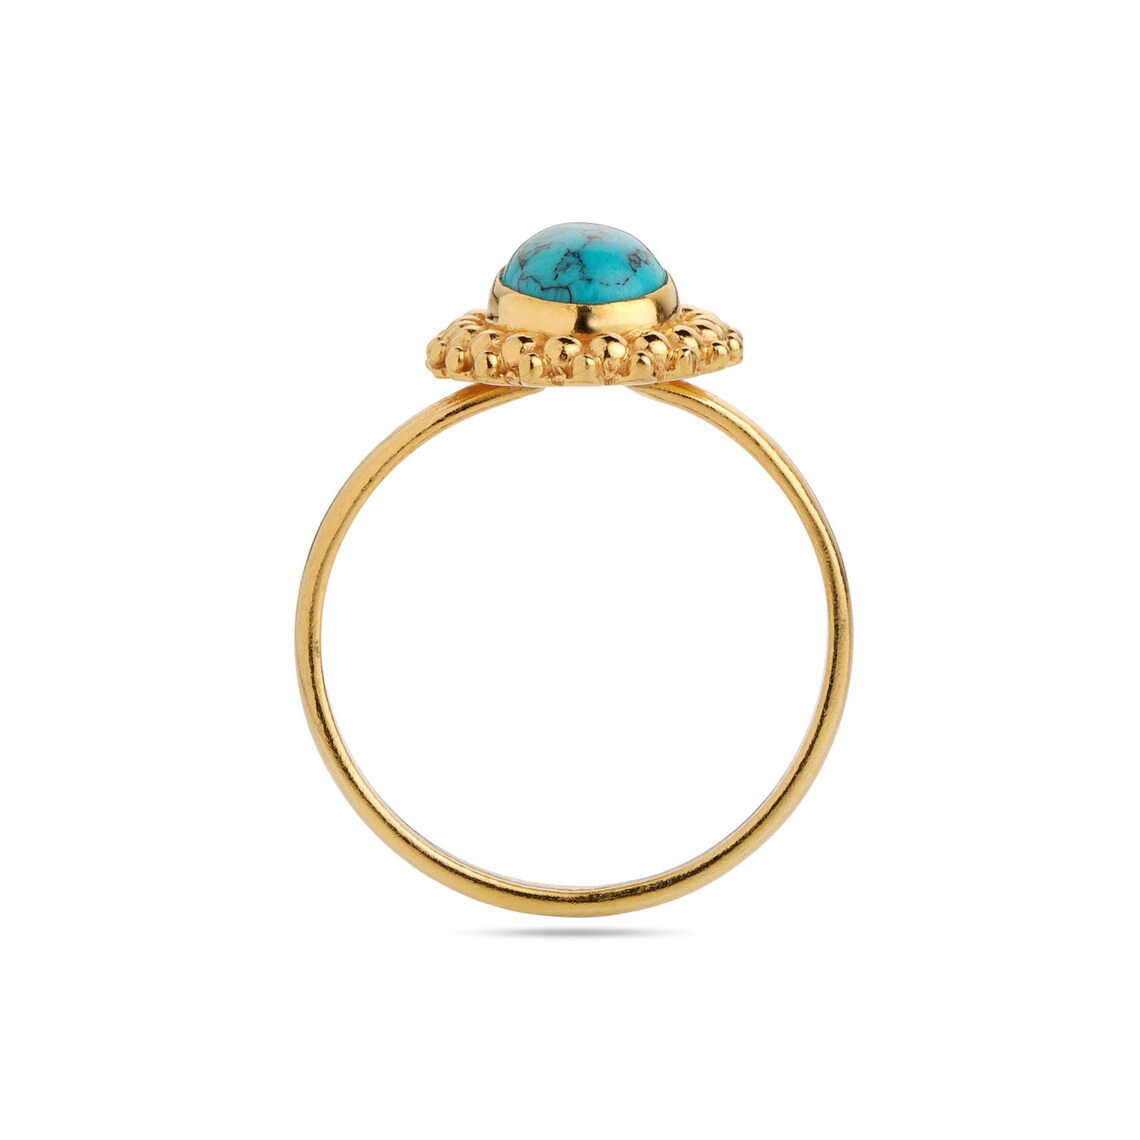 Turquoise Ring - Gold Ring - Gemstone Ring - Oval Ring - Stacking Ring - December Birthstone - Simple Ring - Turquoise Gold Ring